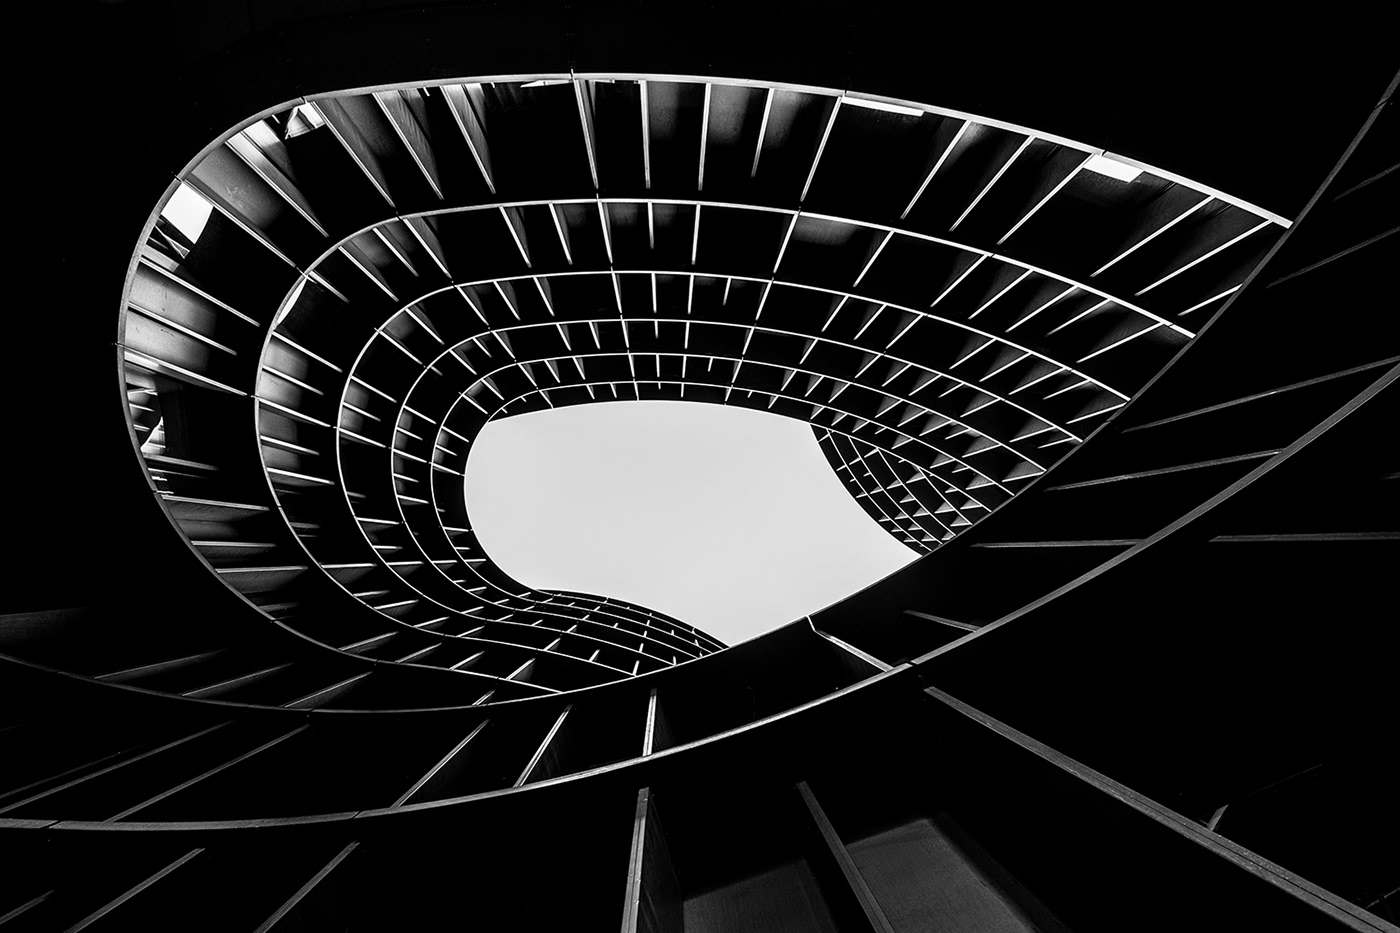 architectural architectural photography black and white photographer fine art photography abstract artwork digital illustration